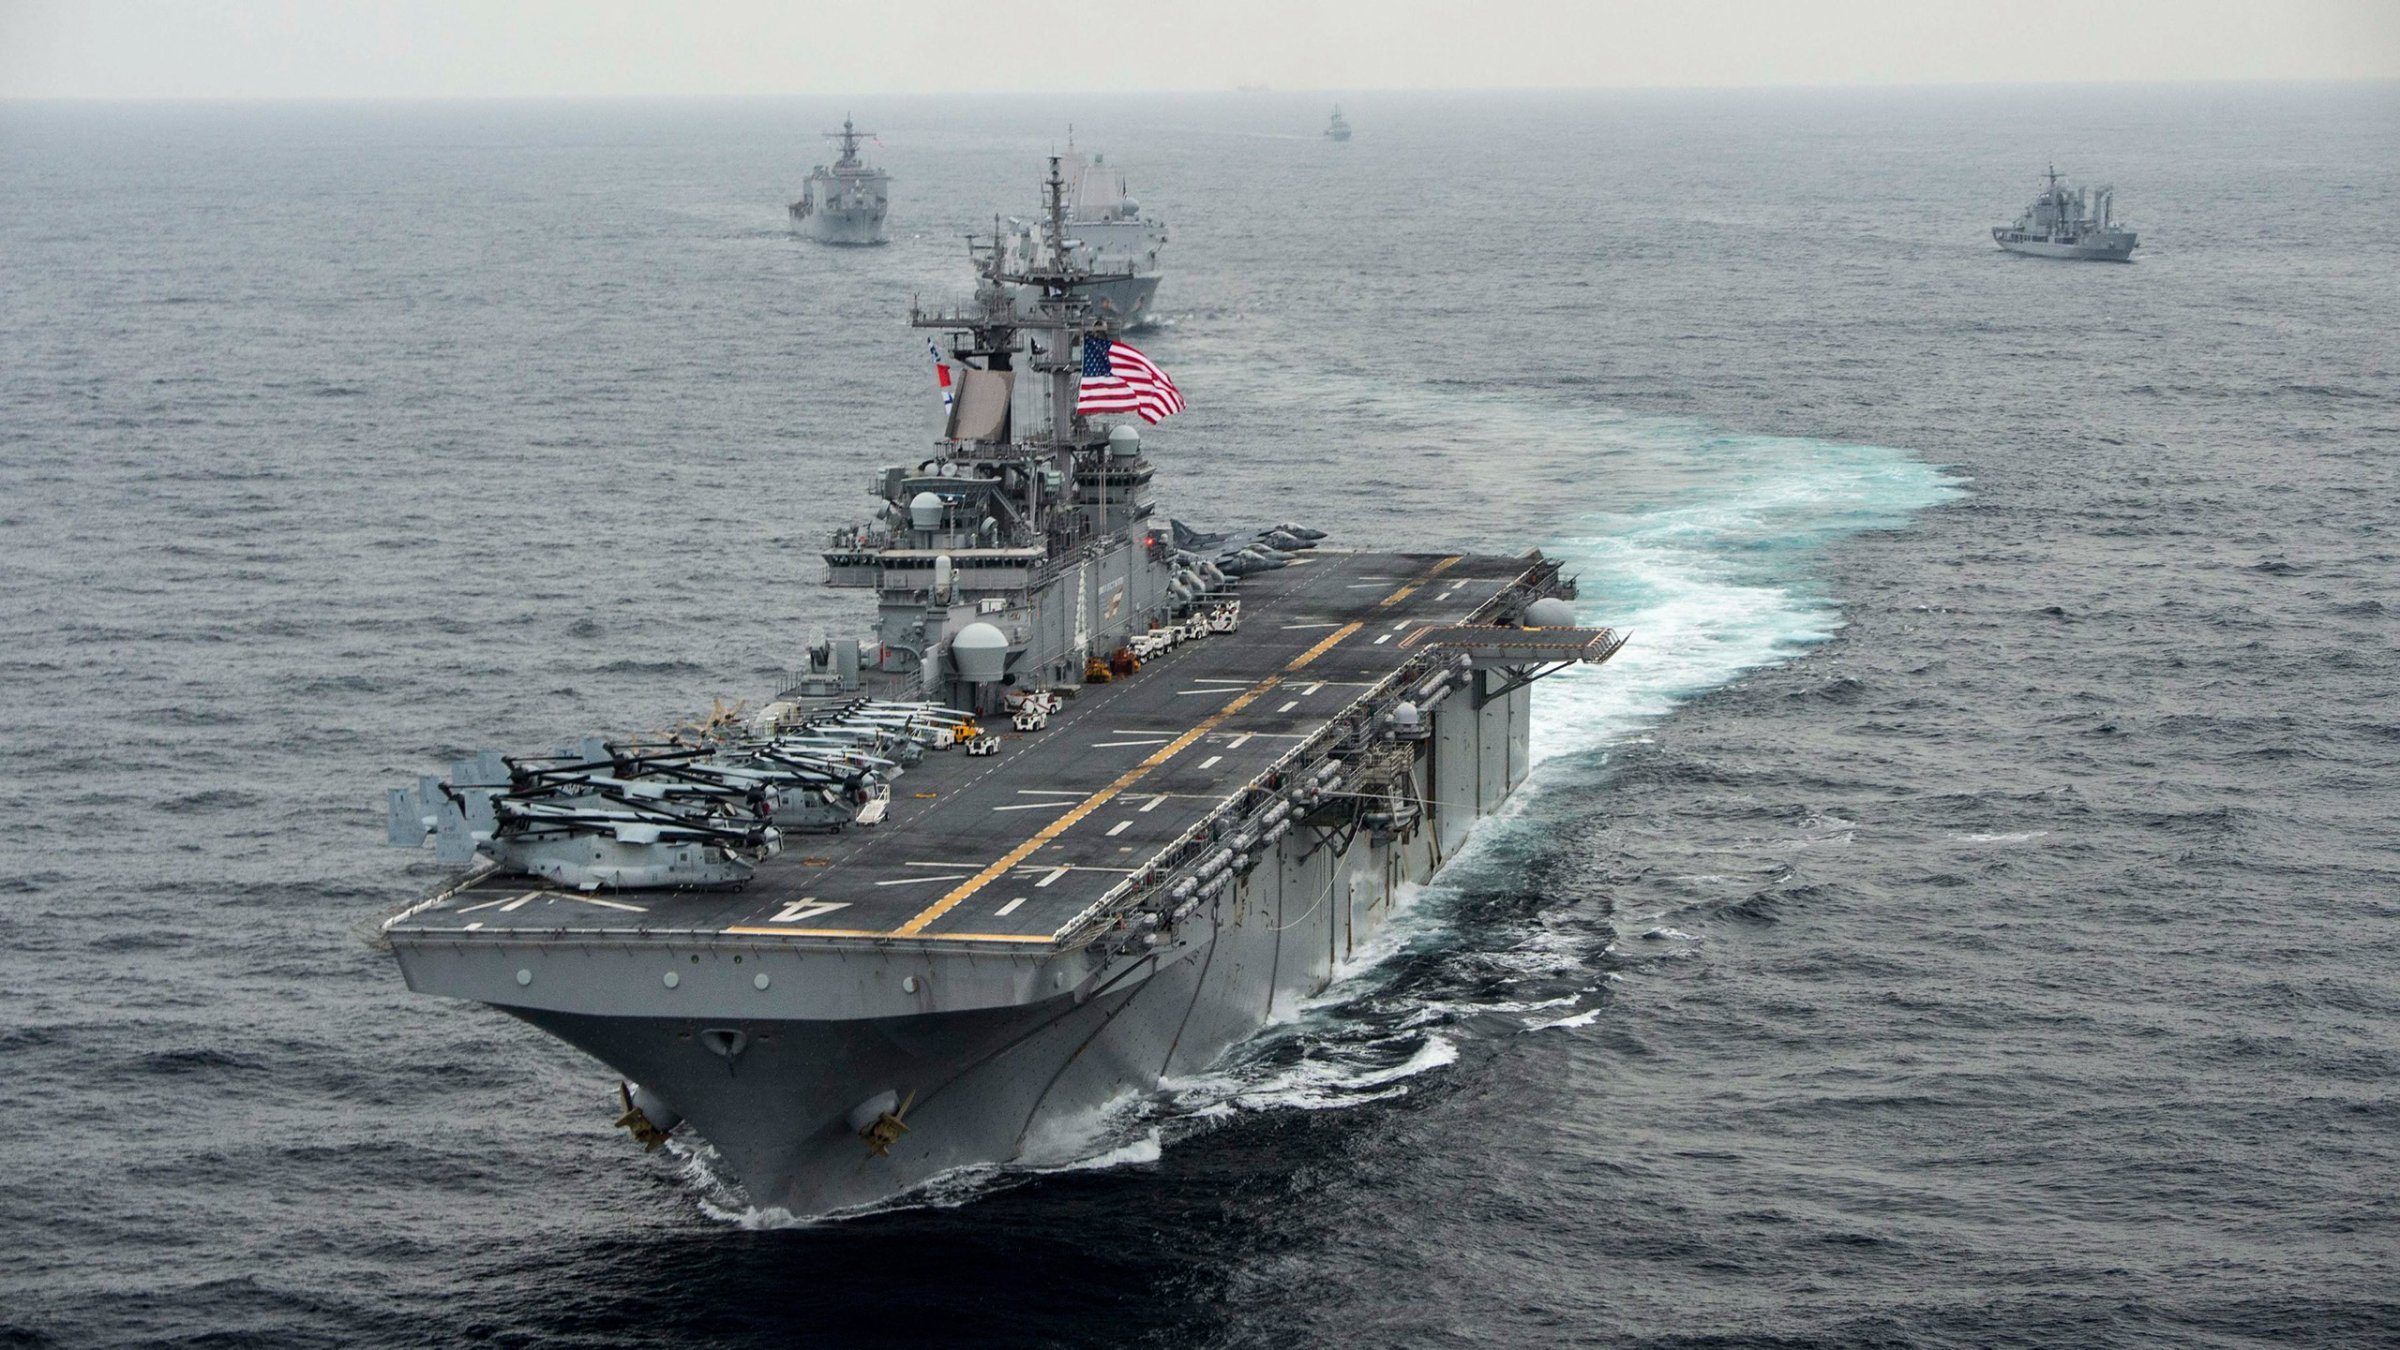 A handout photo provided by the U.S. Navy Media Content Operations on March 9, 2016, shows the amphibious assault ship USS Boxer (LHD 4) transiting the East Sea during Exercise Ssang Yong, in conjunction with the Republic of Korea Navy, one day earlier.